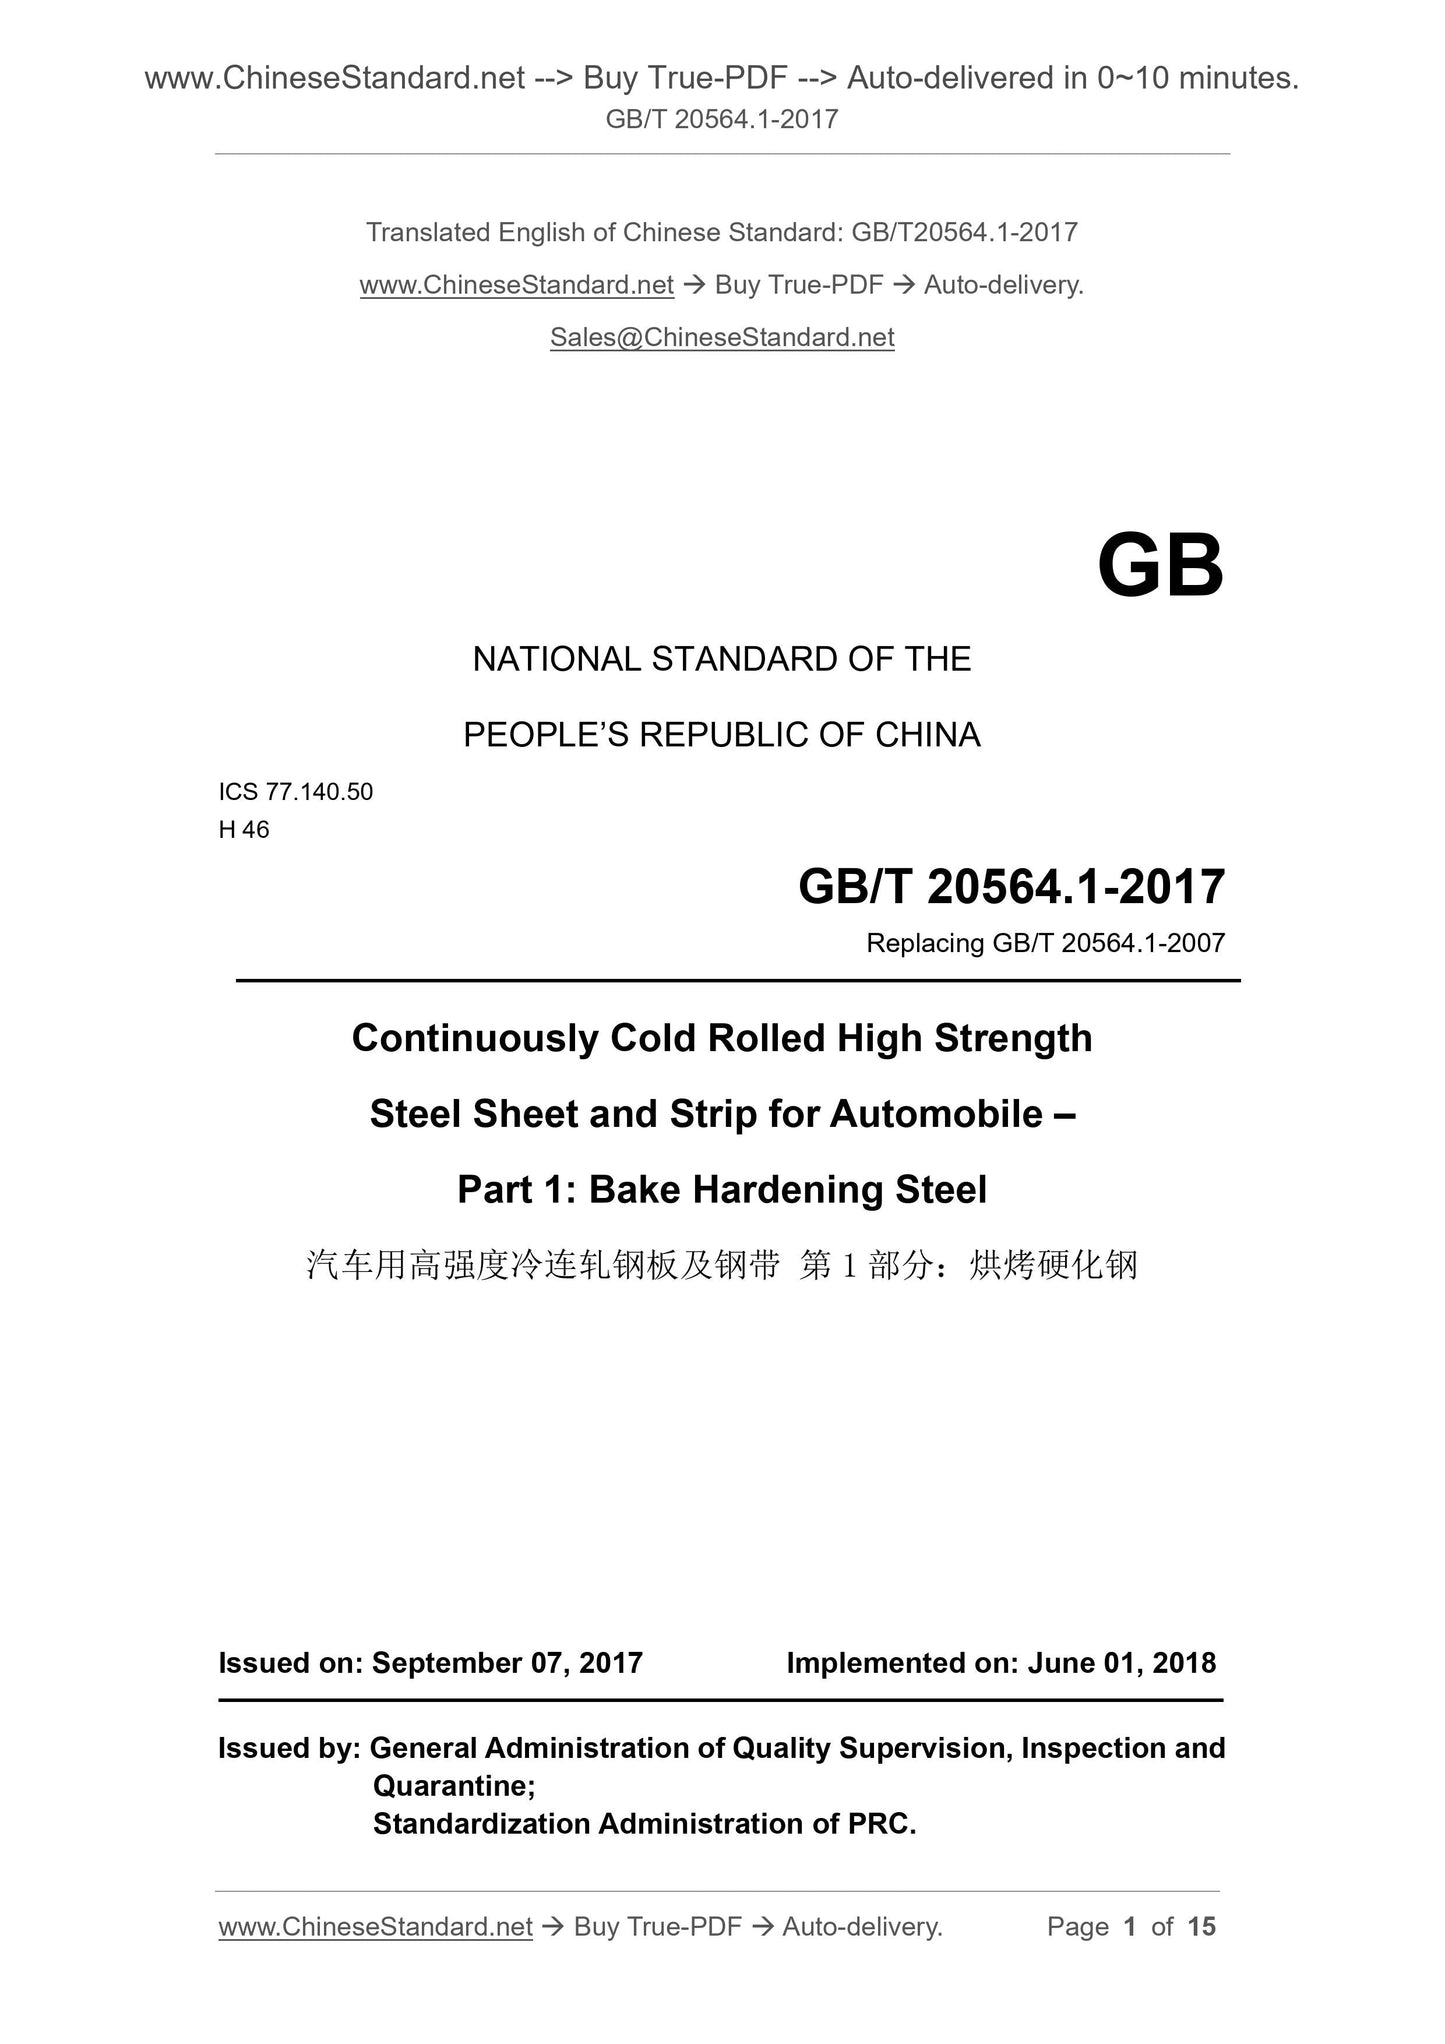 GB/T 20564.1-2017 Page 1